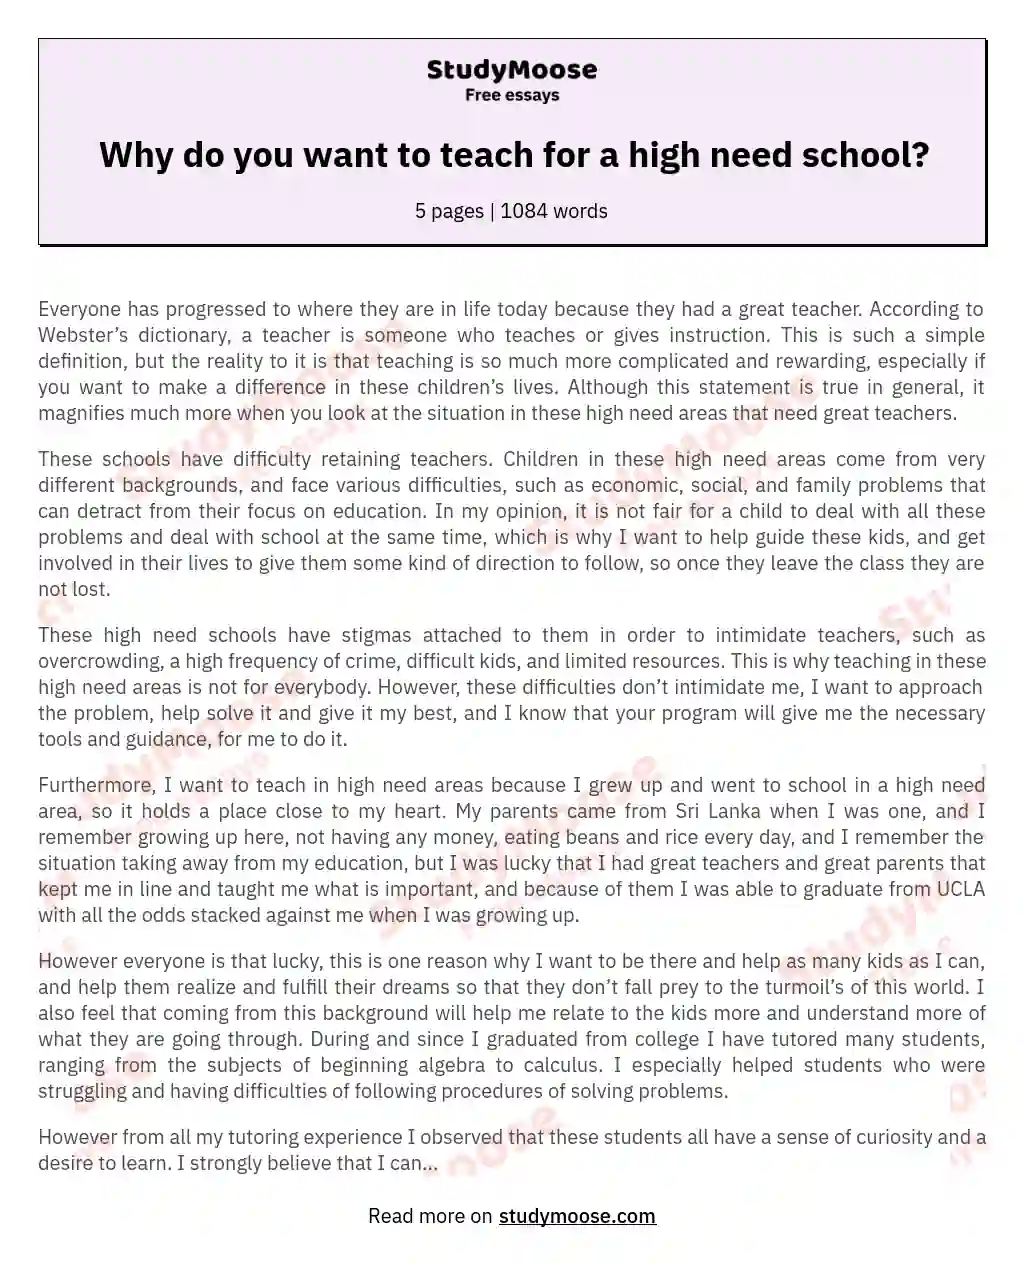 Why do you want to teach for a high need school? essay